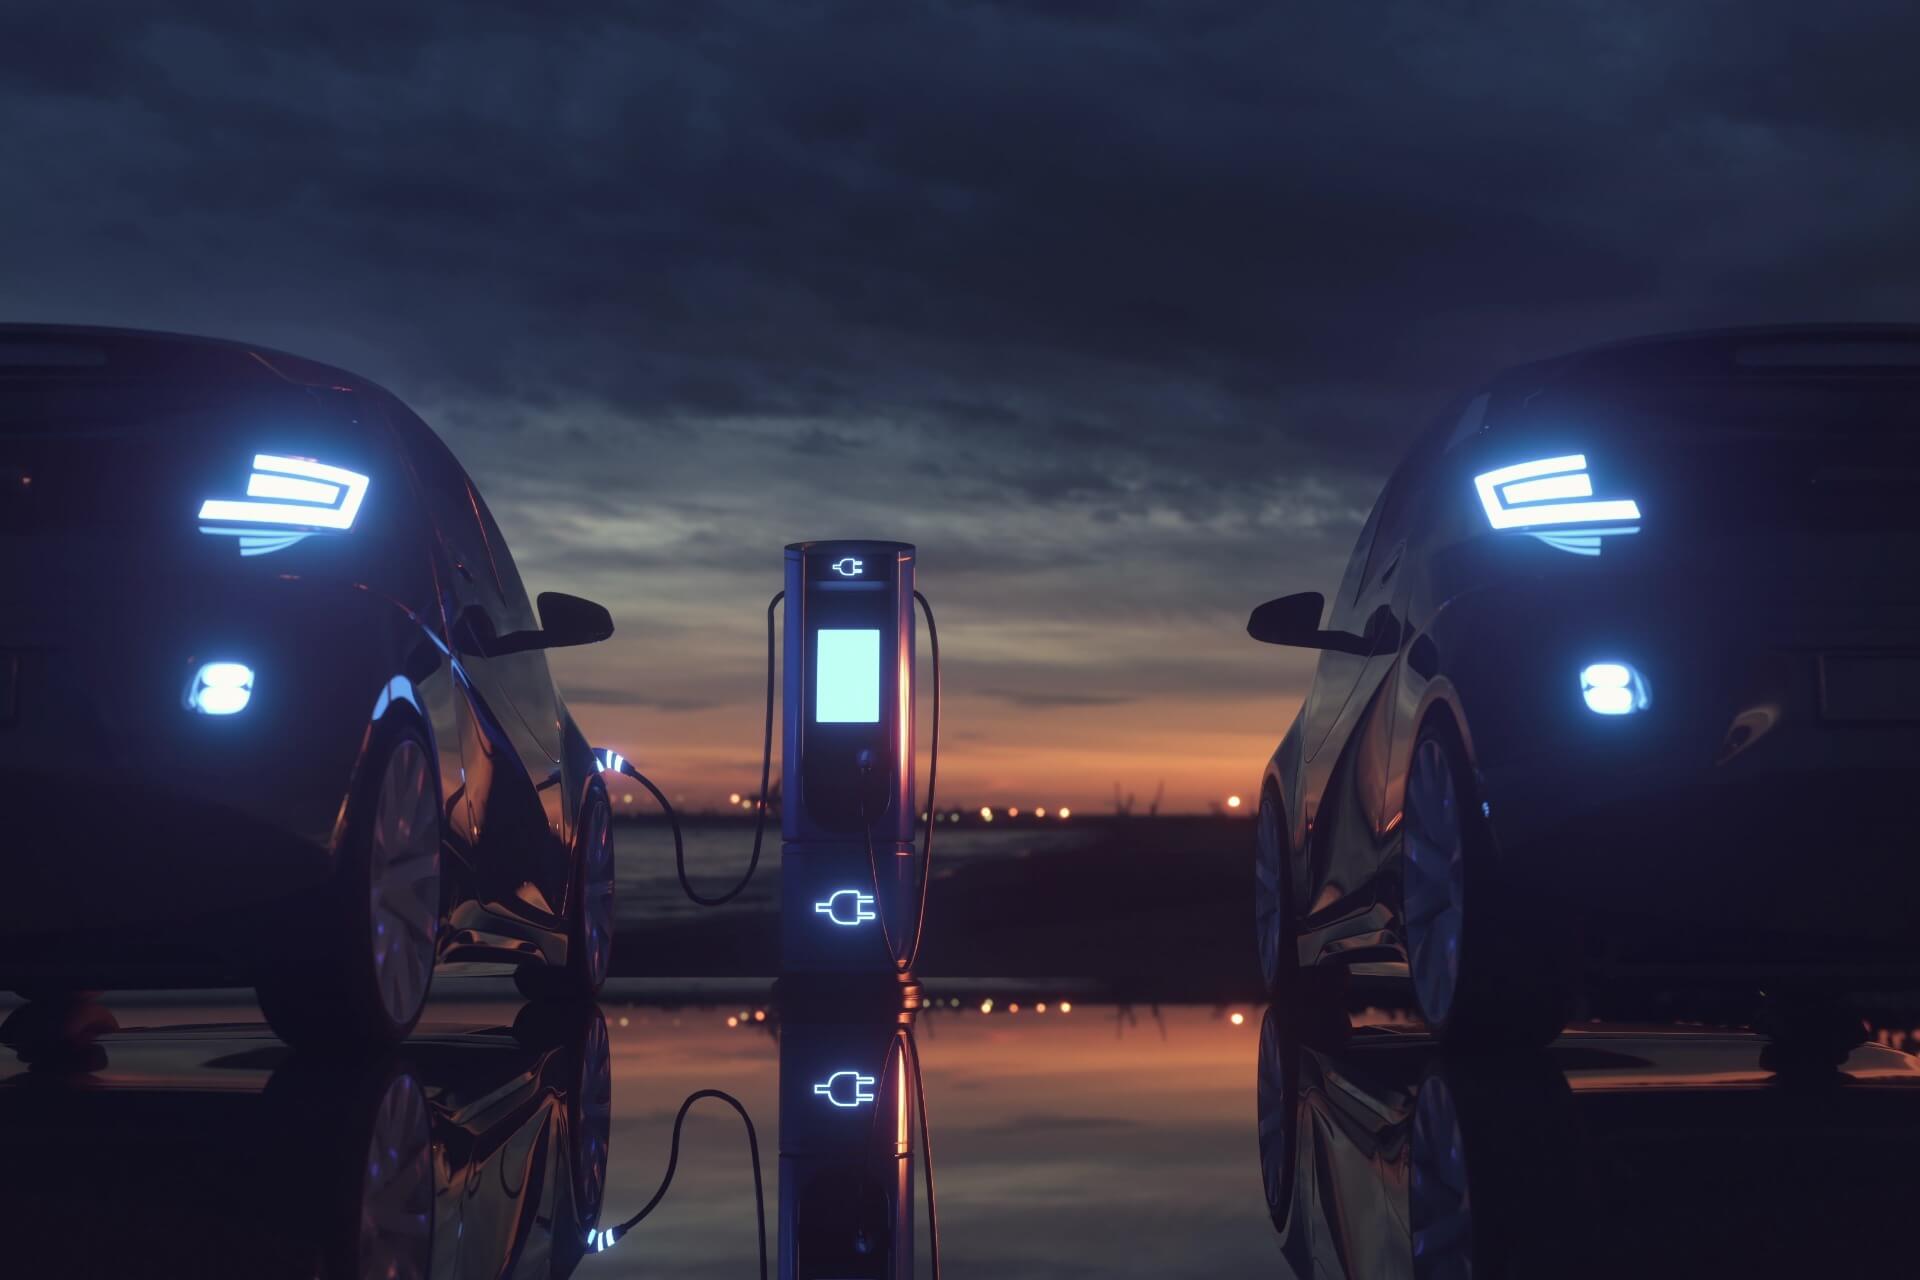 Two electric vehicles charging at an electric car station at sunset